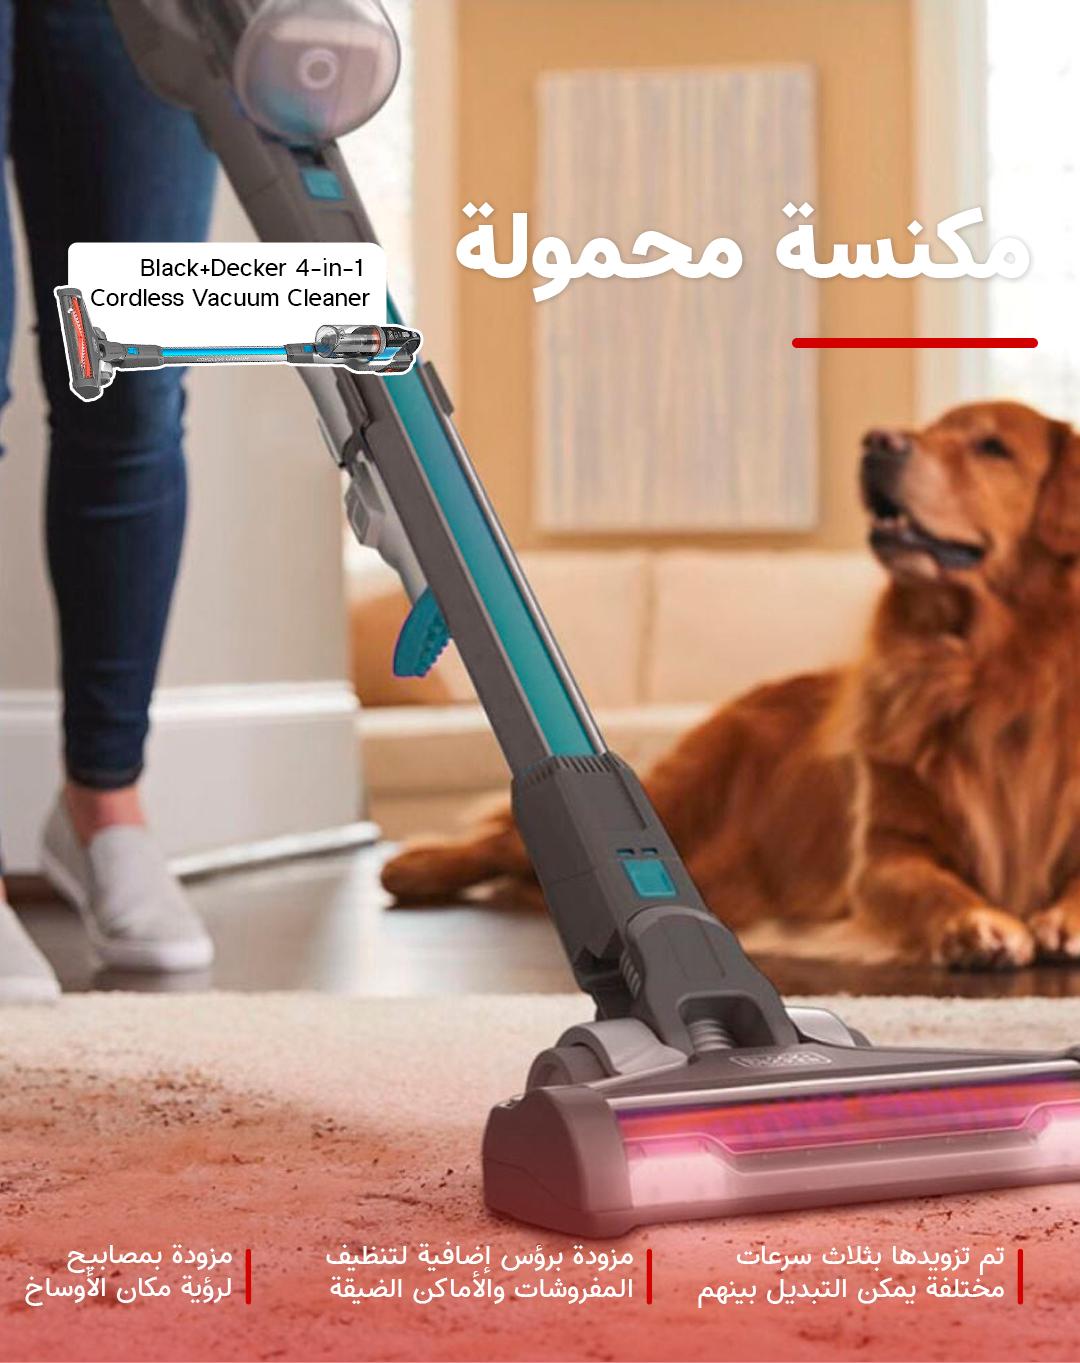 BLACK&amp;DECKER Black+Decker 36V 4 in 1 Li Ion Cordless Powerseries EXTREME Upright Stick Vacuum Cleaner with Crevice Tool & Flip out Brush Blue  BHFEV362D GB 2 Years Warranty